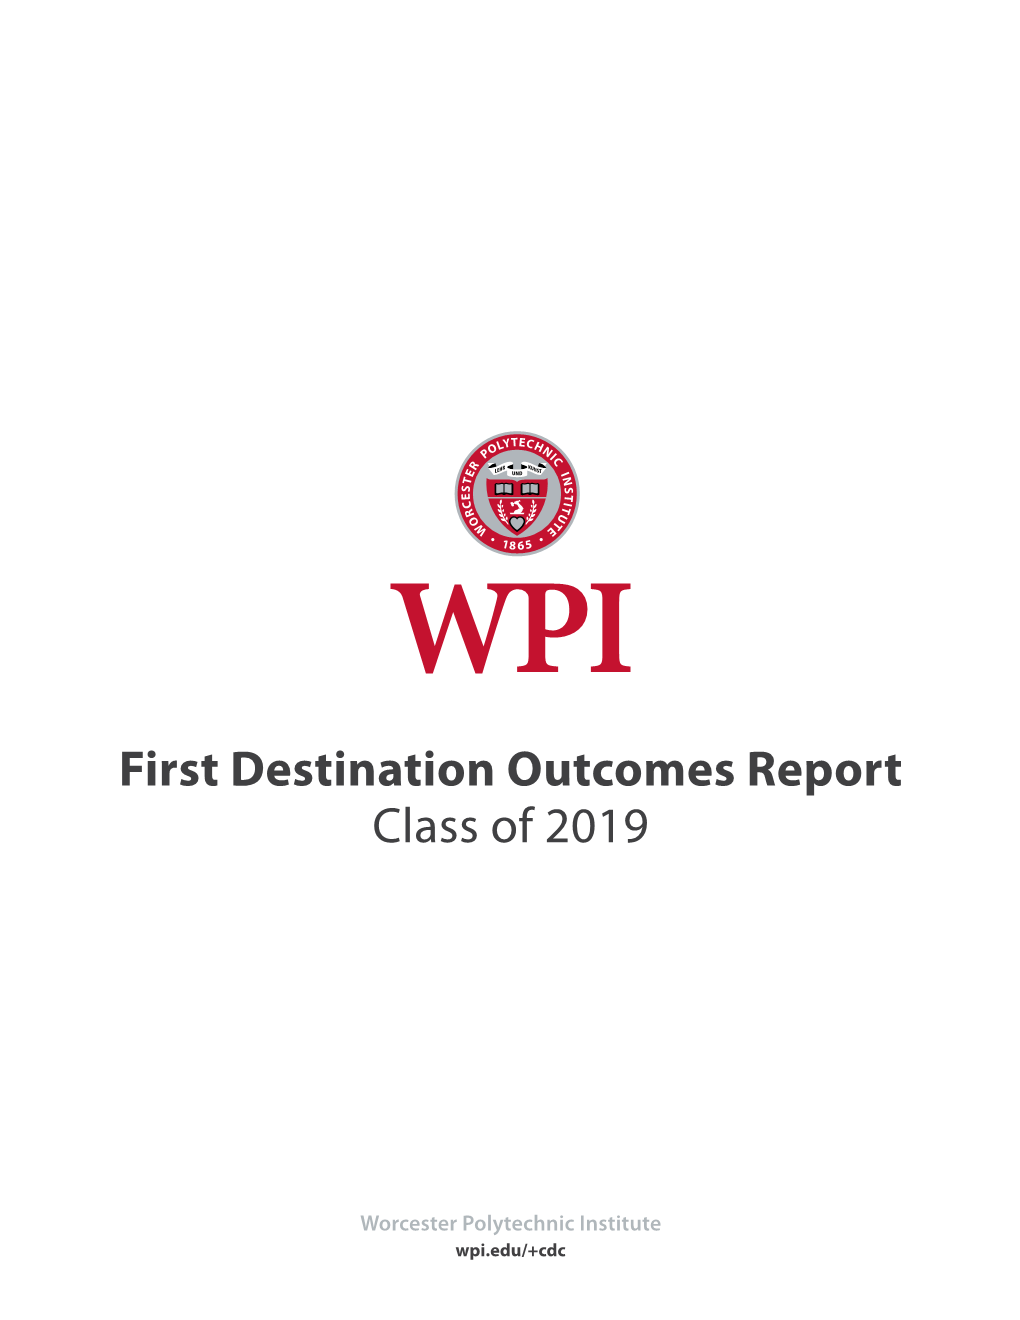 First Destination Outcomes Report Class of 2019